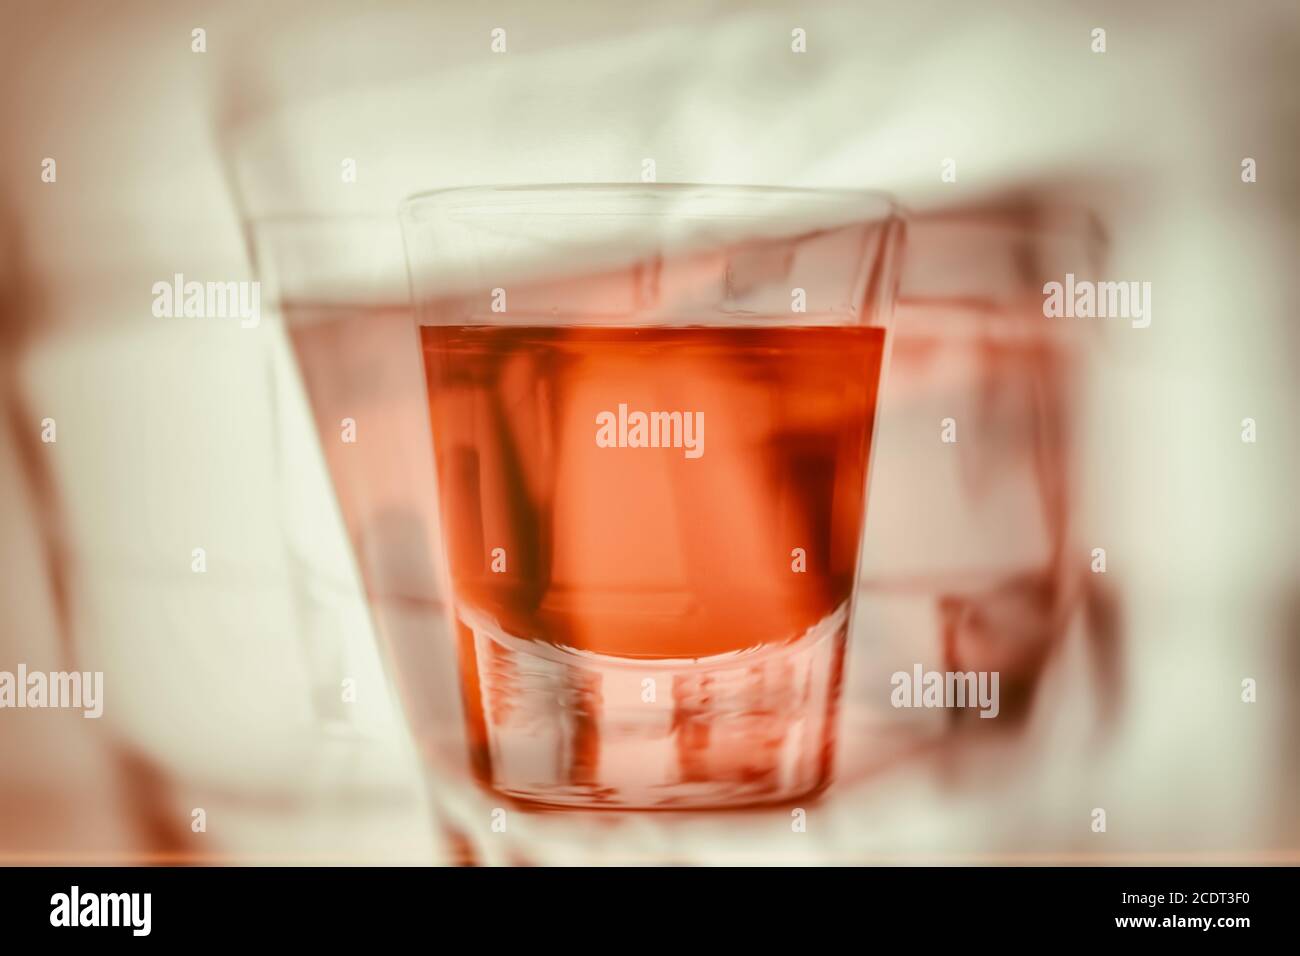 Abstract first person perspective of being drunk and reaching for another glass of alcohol. Stock Photo